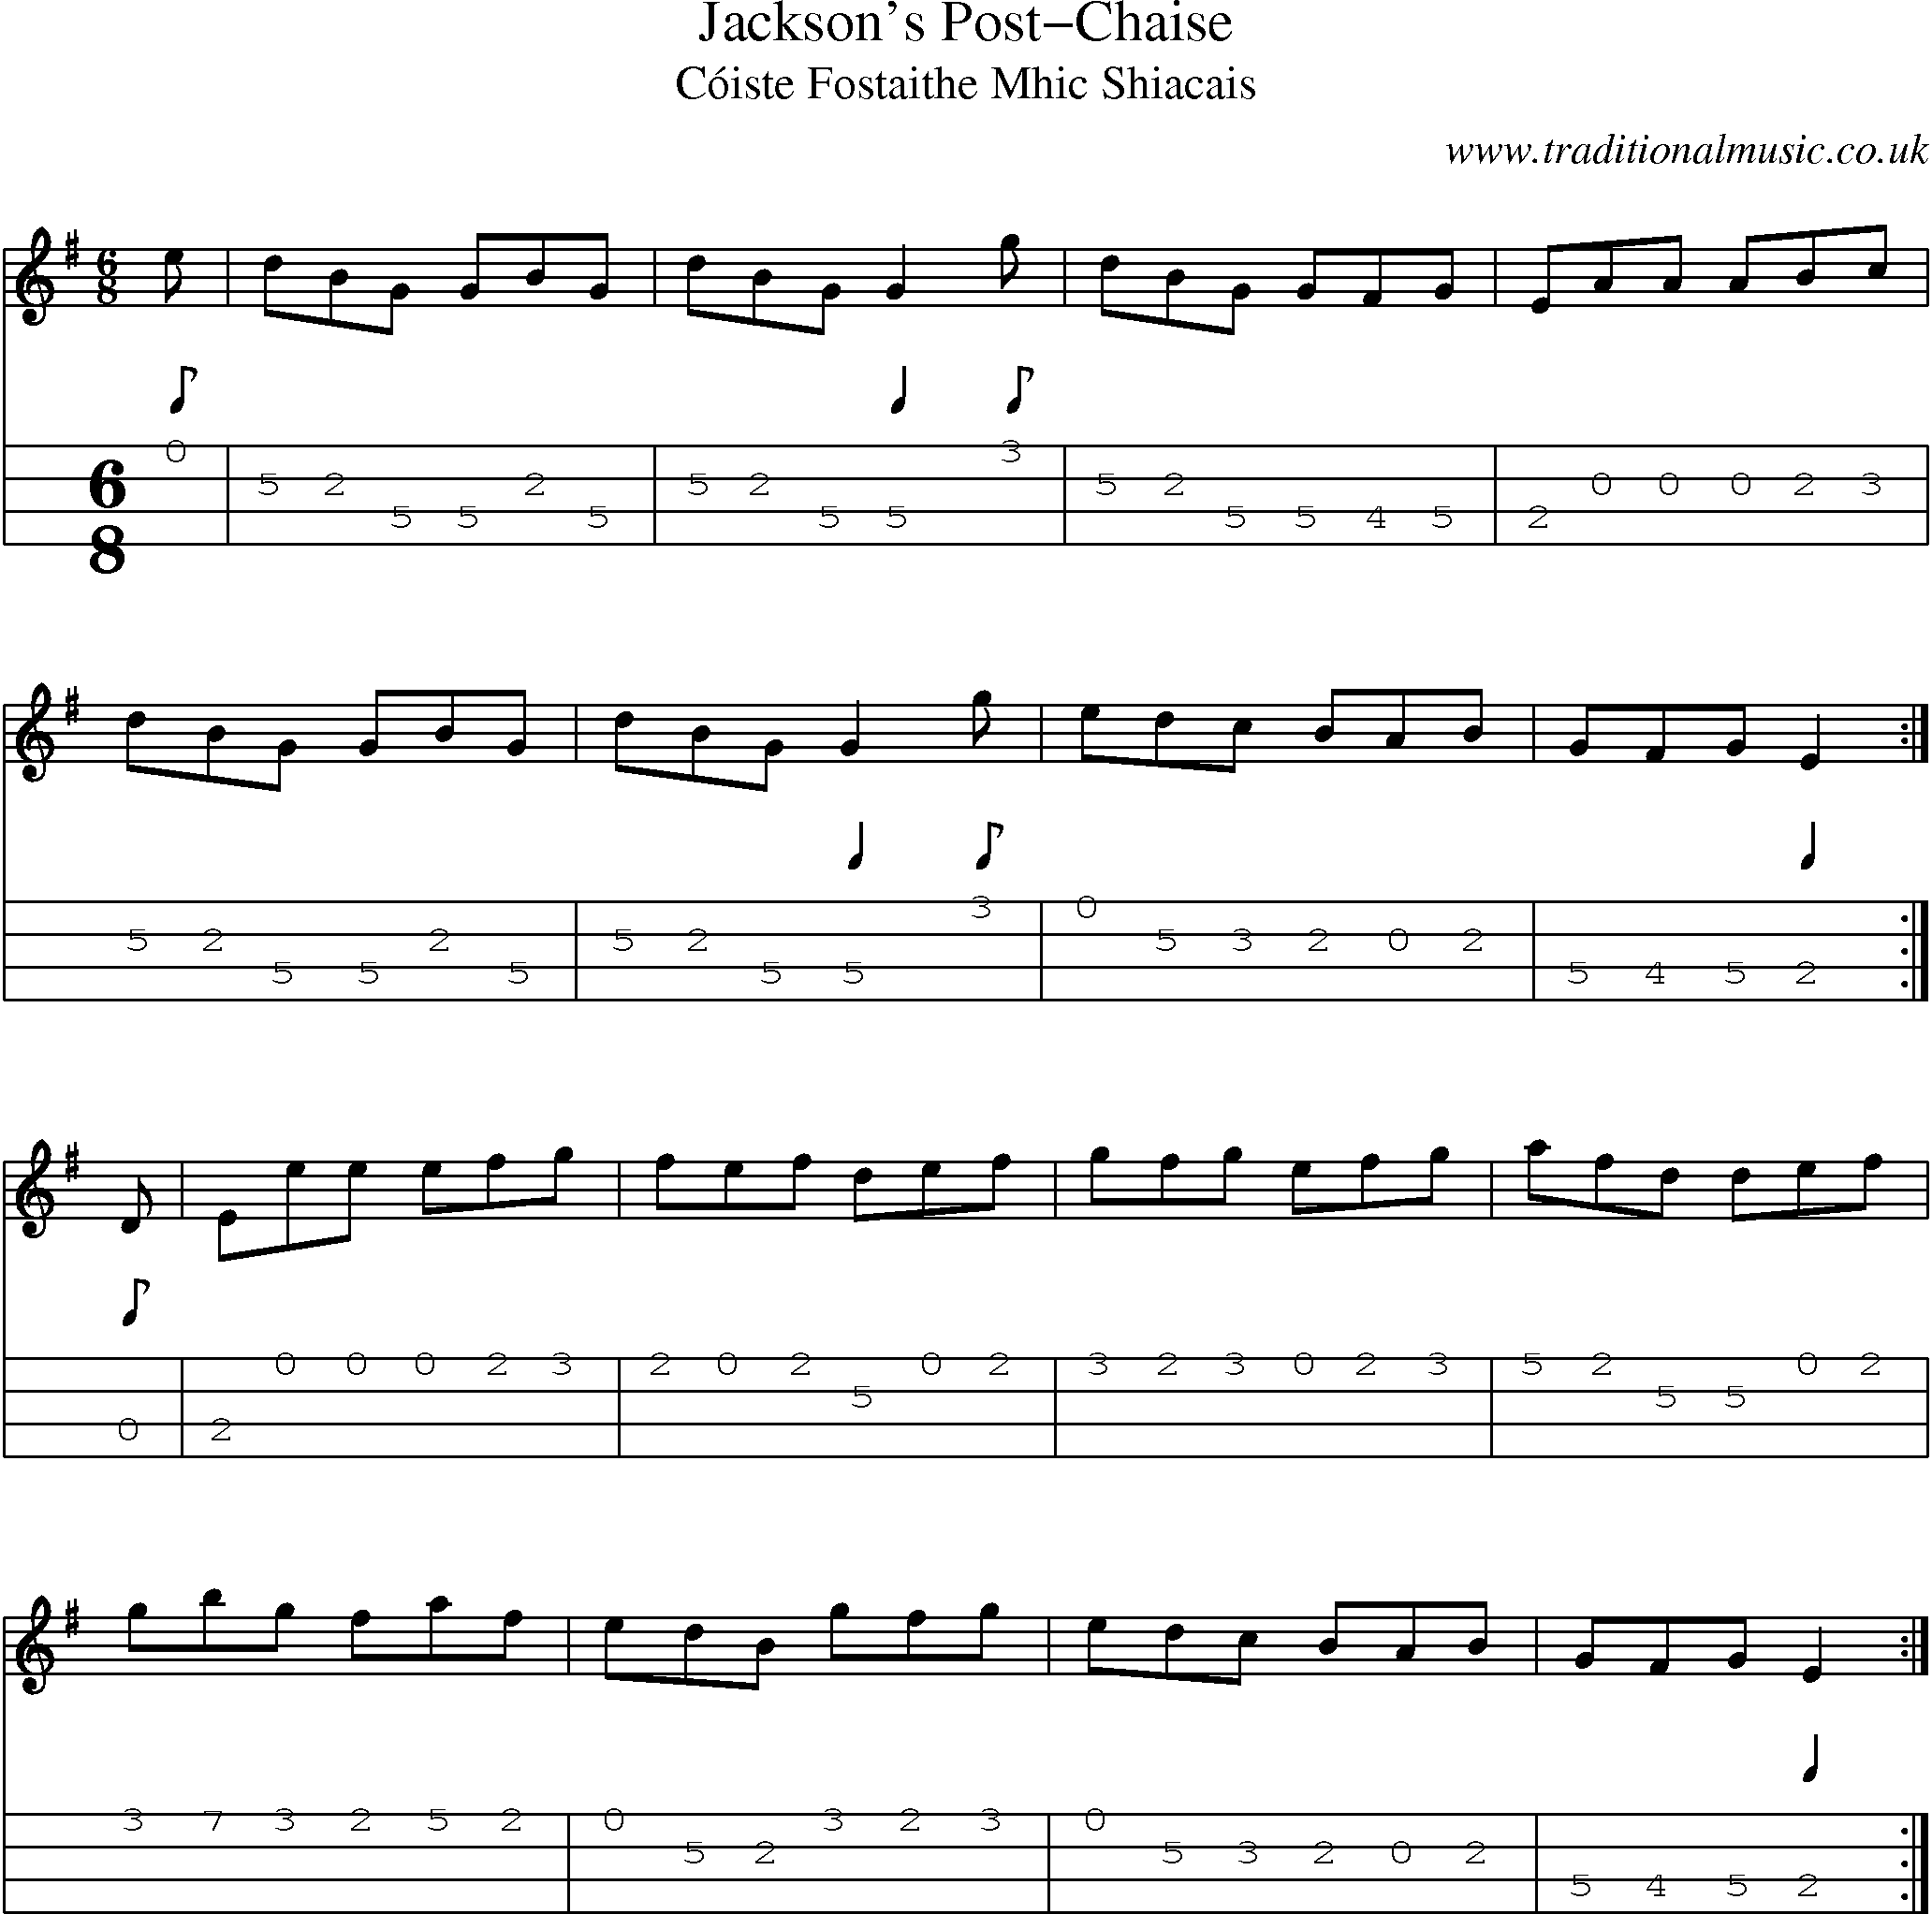 Music Score and Mandolin Tabs for Jacksons Postchaise